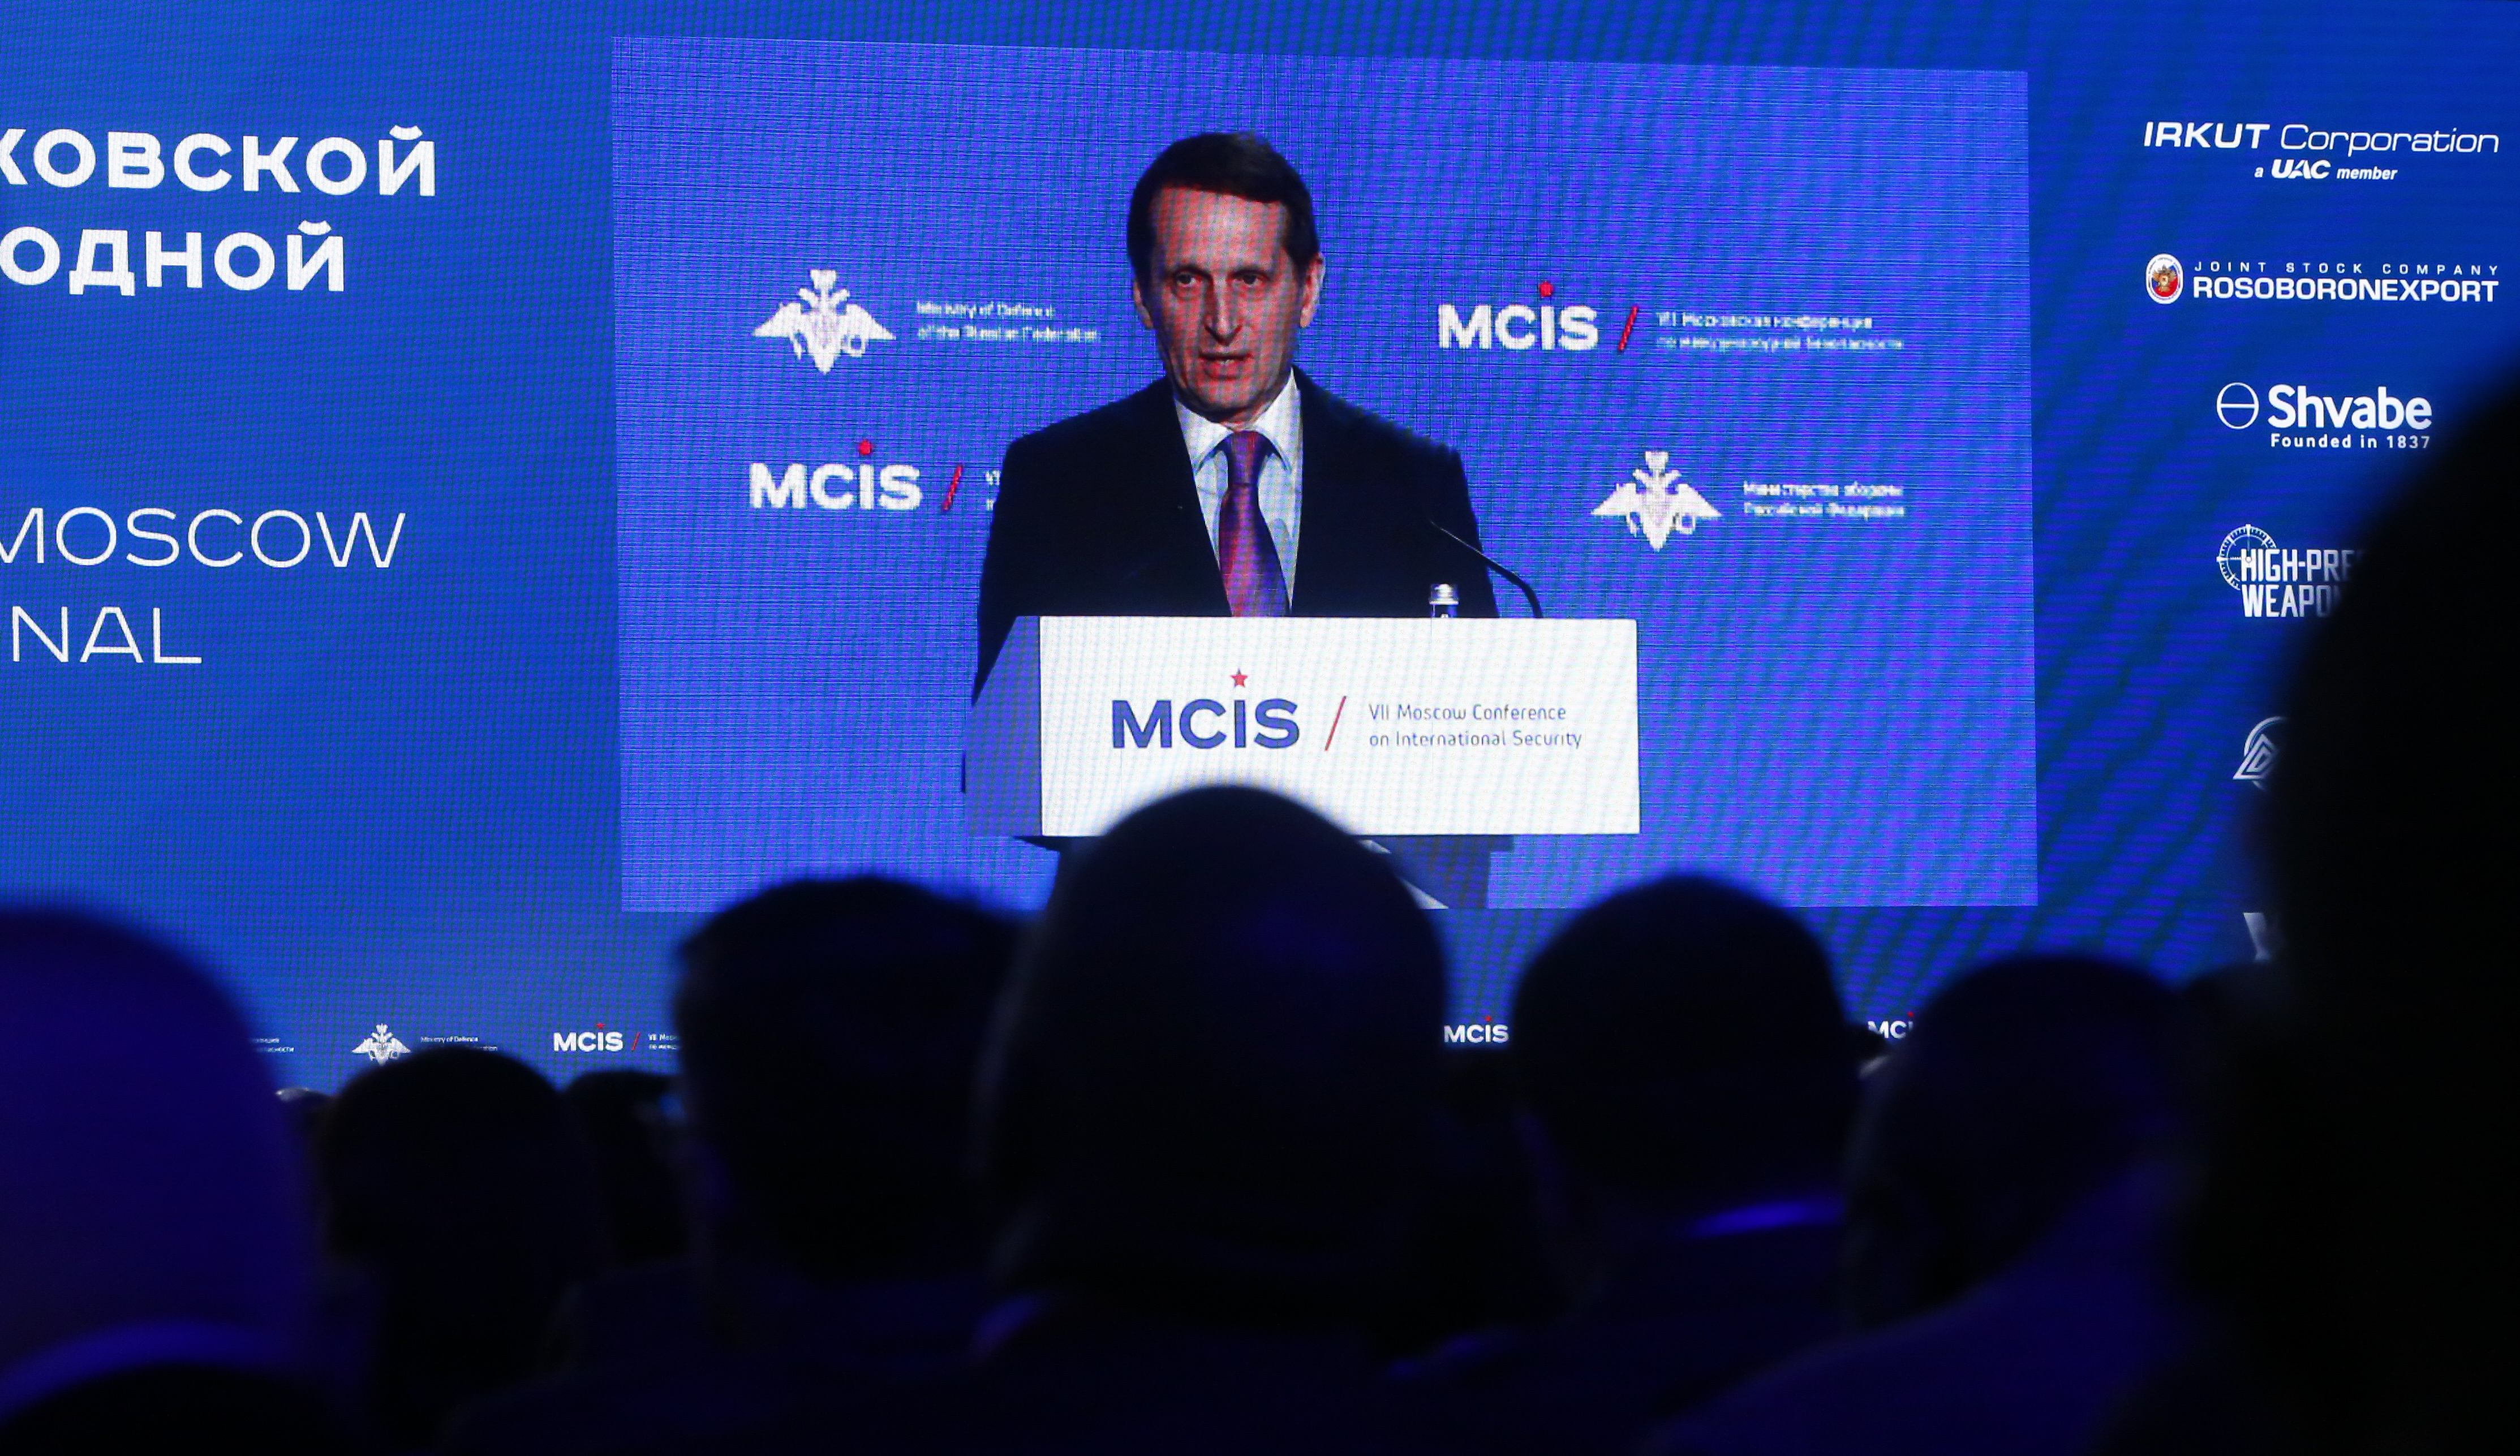 Participants listen to Sergey Naryshkin, the head of Russia’s foreign intelligence agency, during the annual Moscow Conference on International Security in Moscow